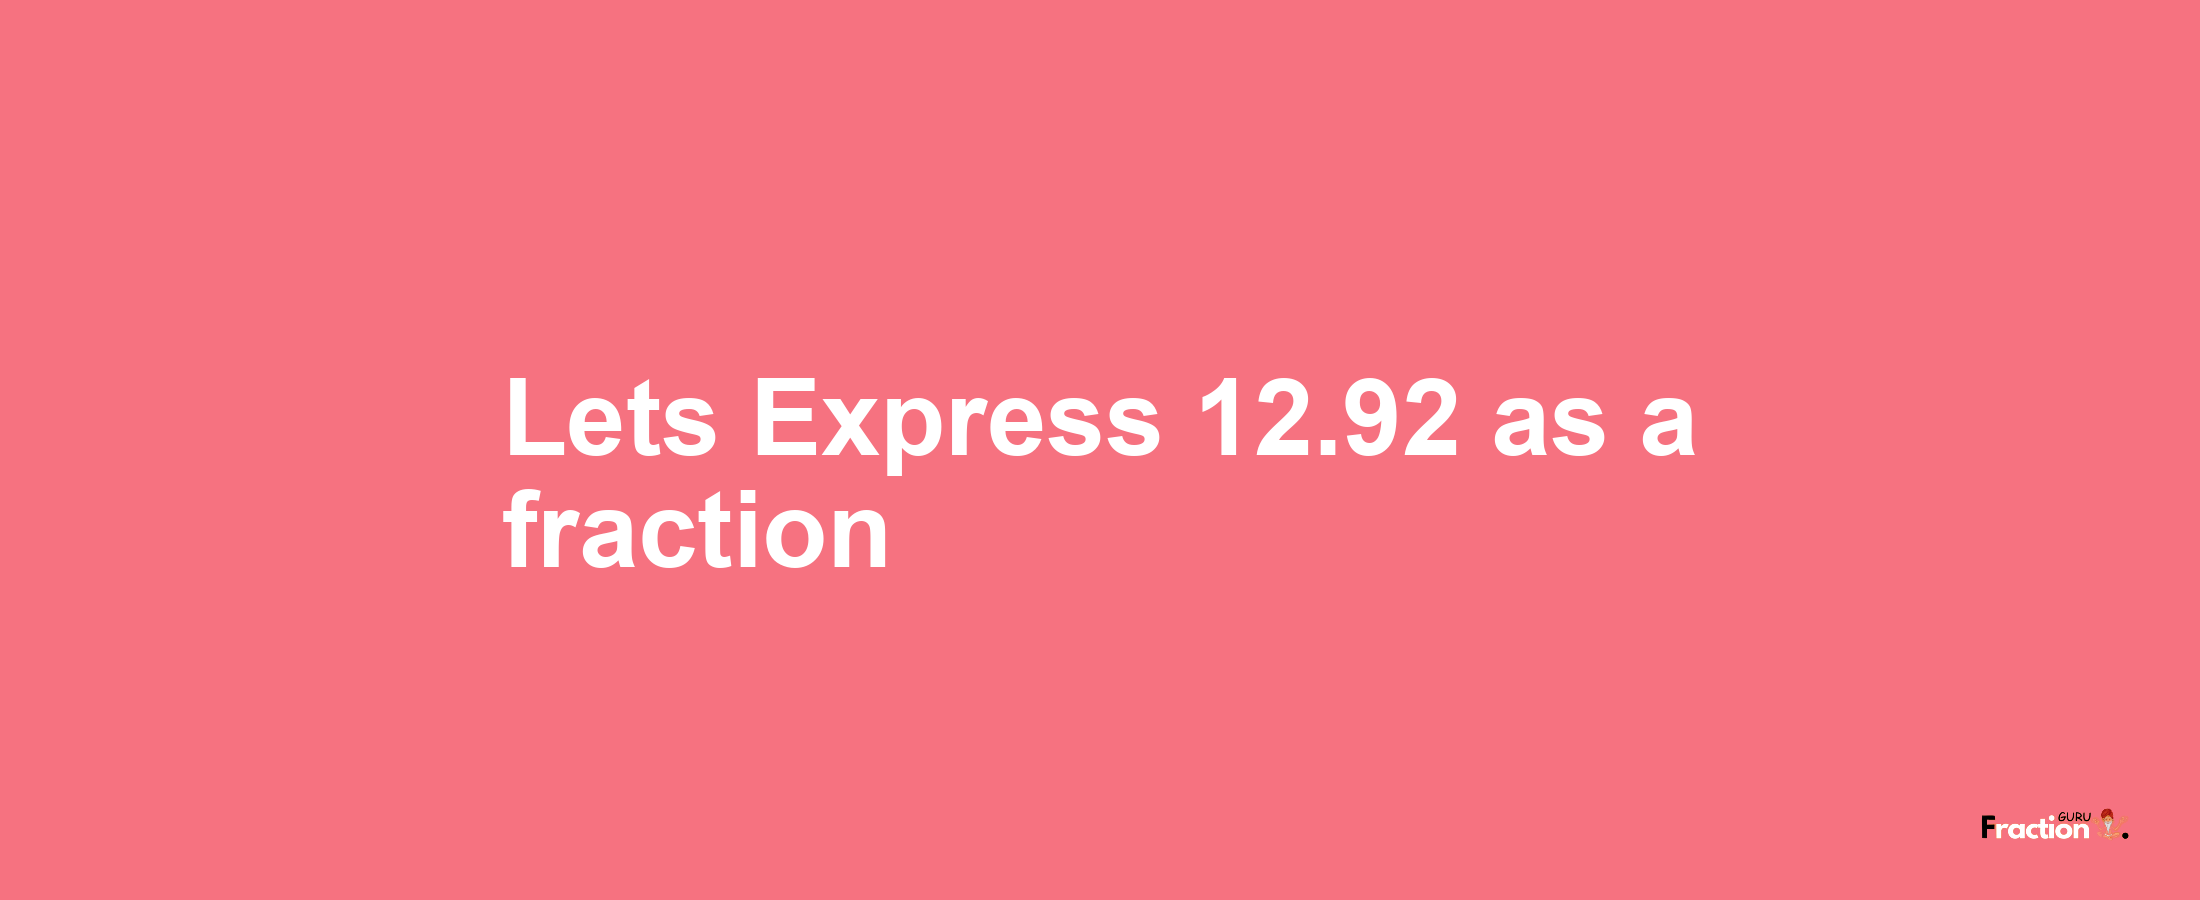 Lets Express 12.92 as afraction